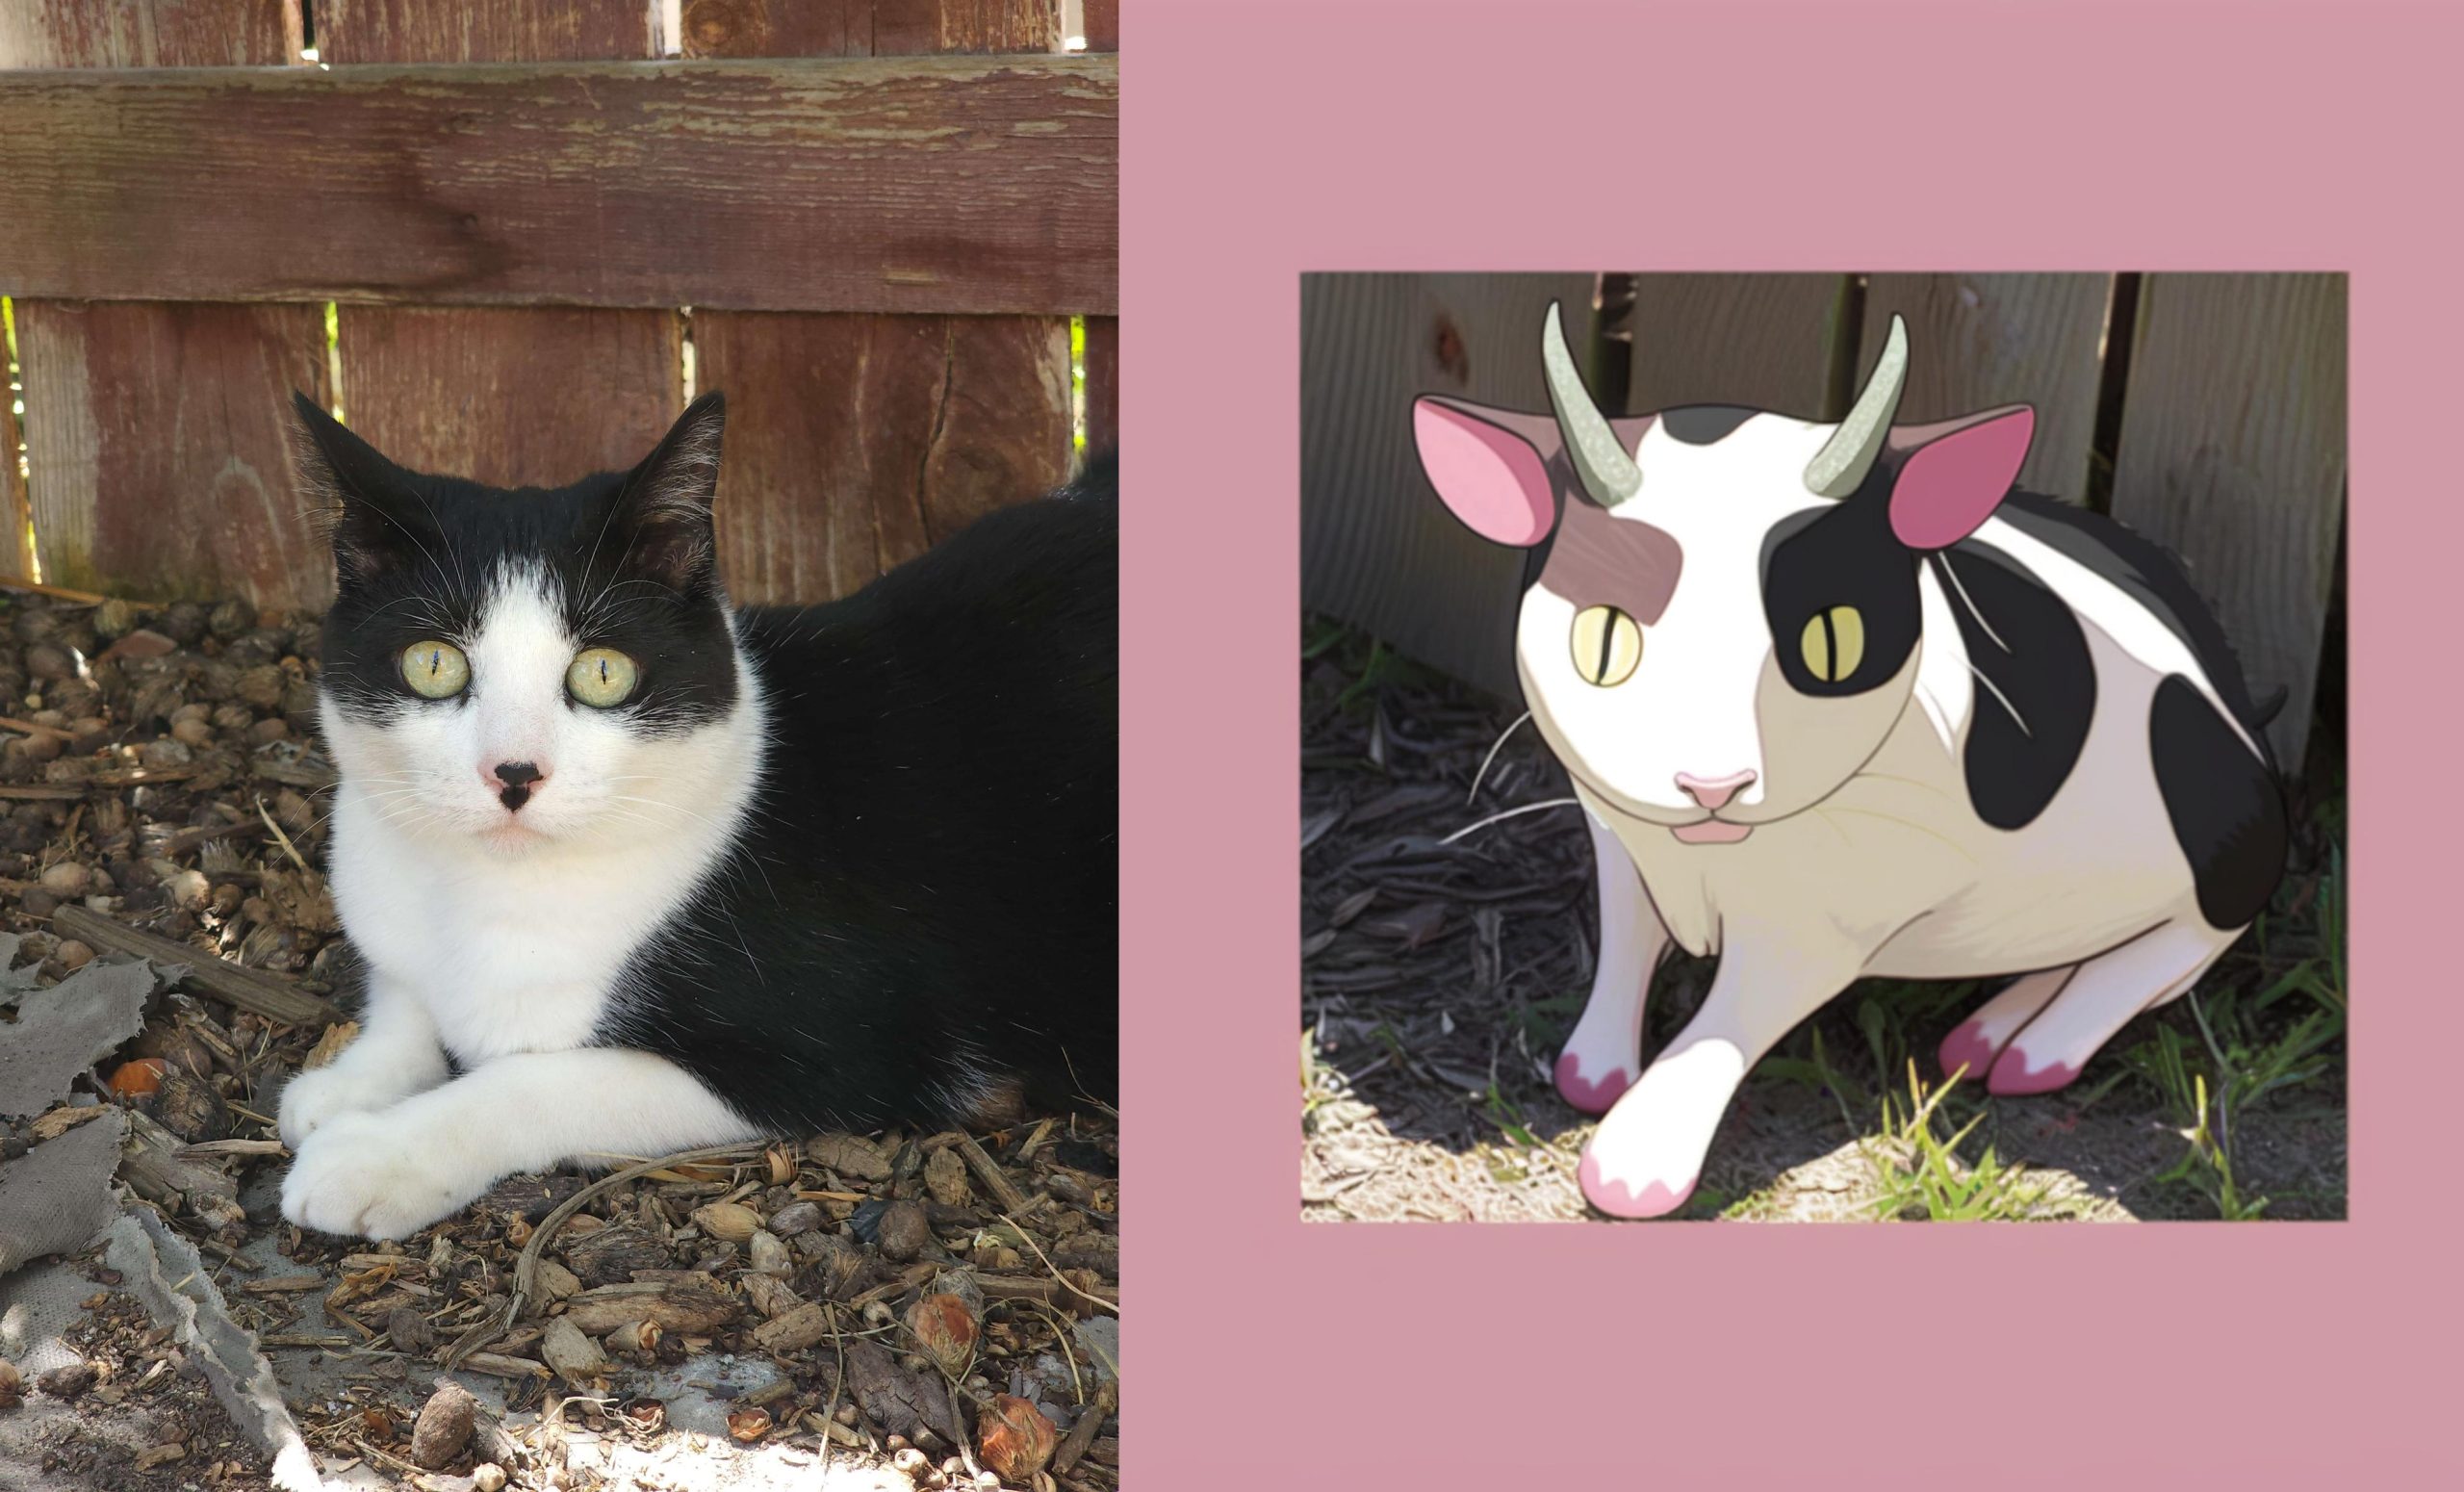 Creep over Miltank, this cat is now #1 finest cow Pokemon.